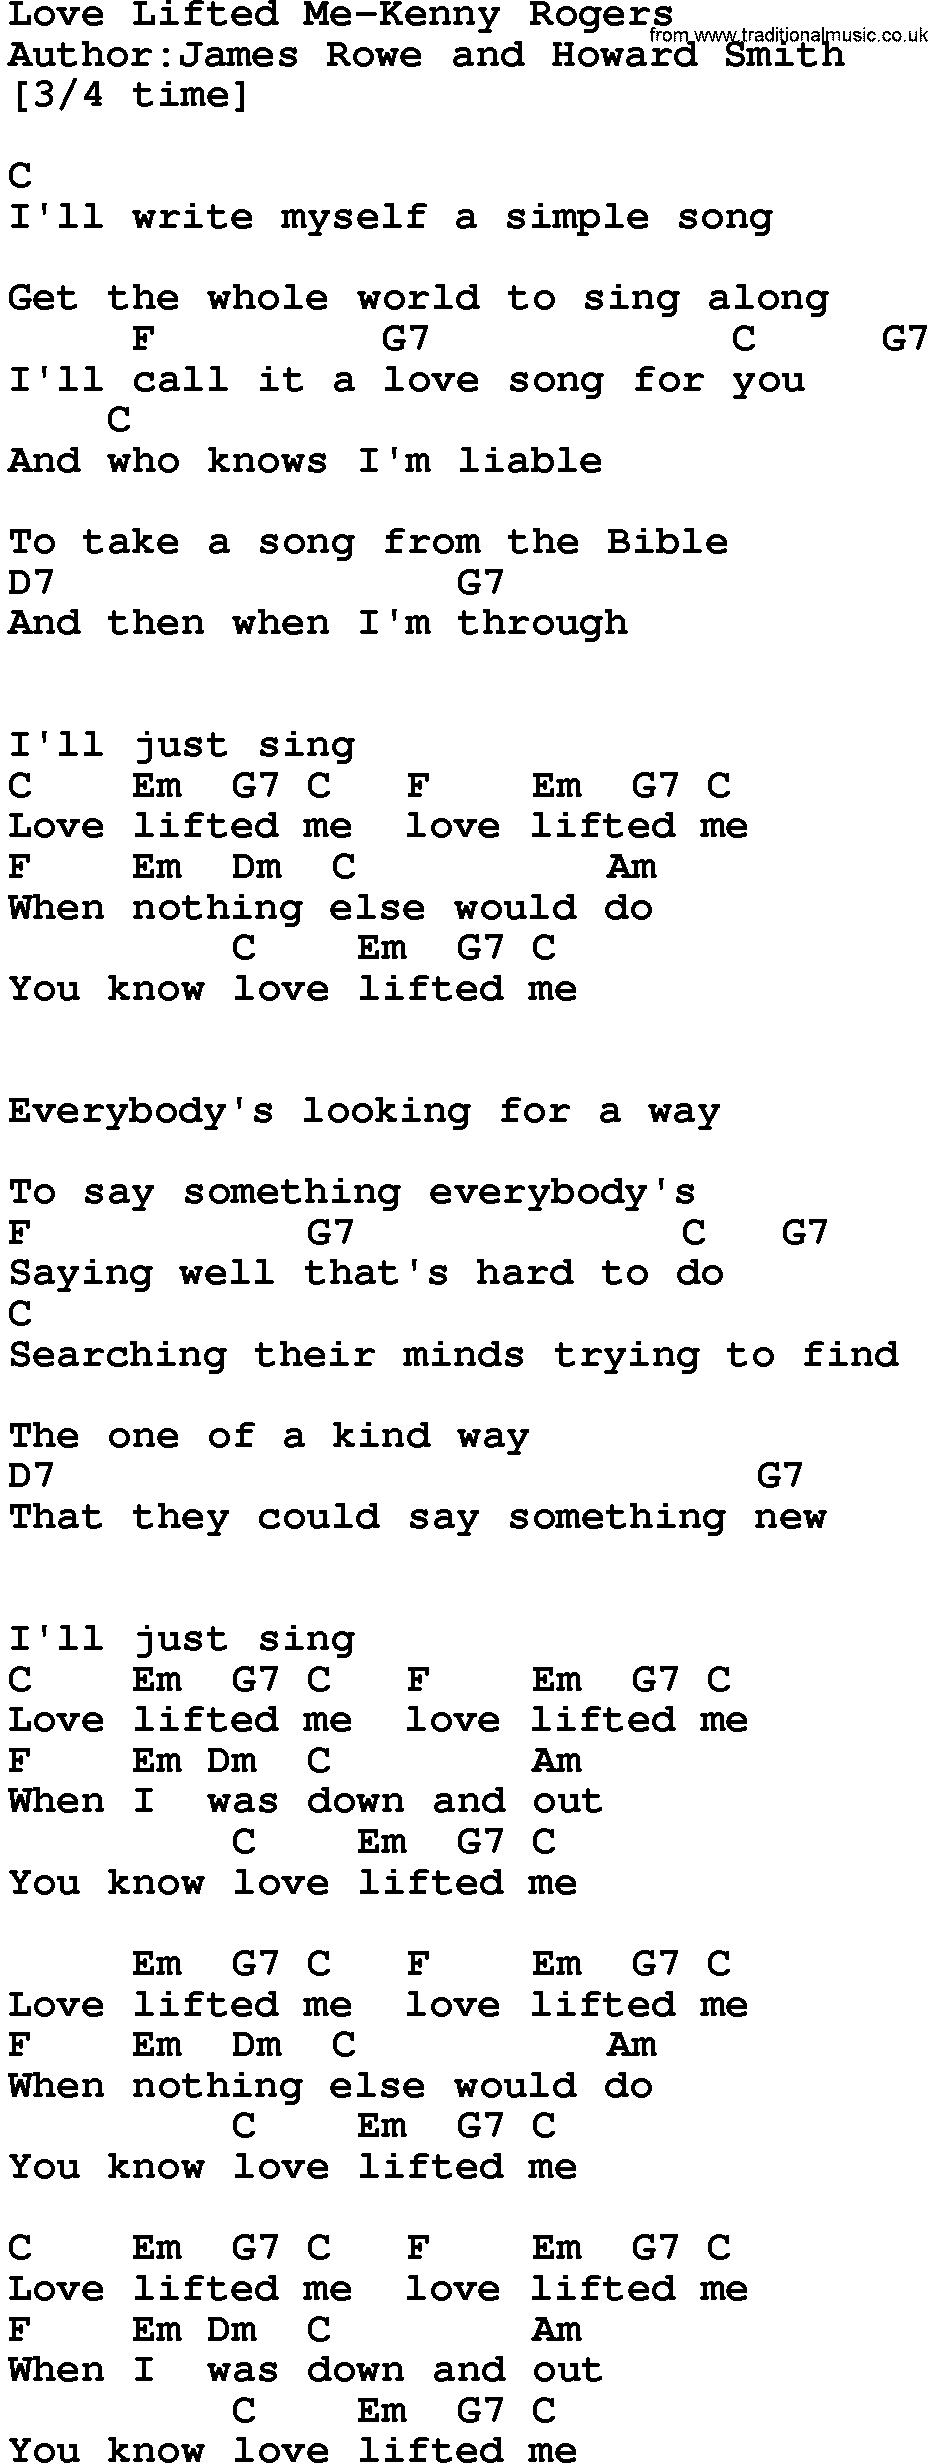 Country music song: Love Lifted Me-Kenny Rogers lyrics and chords